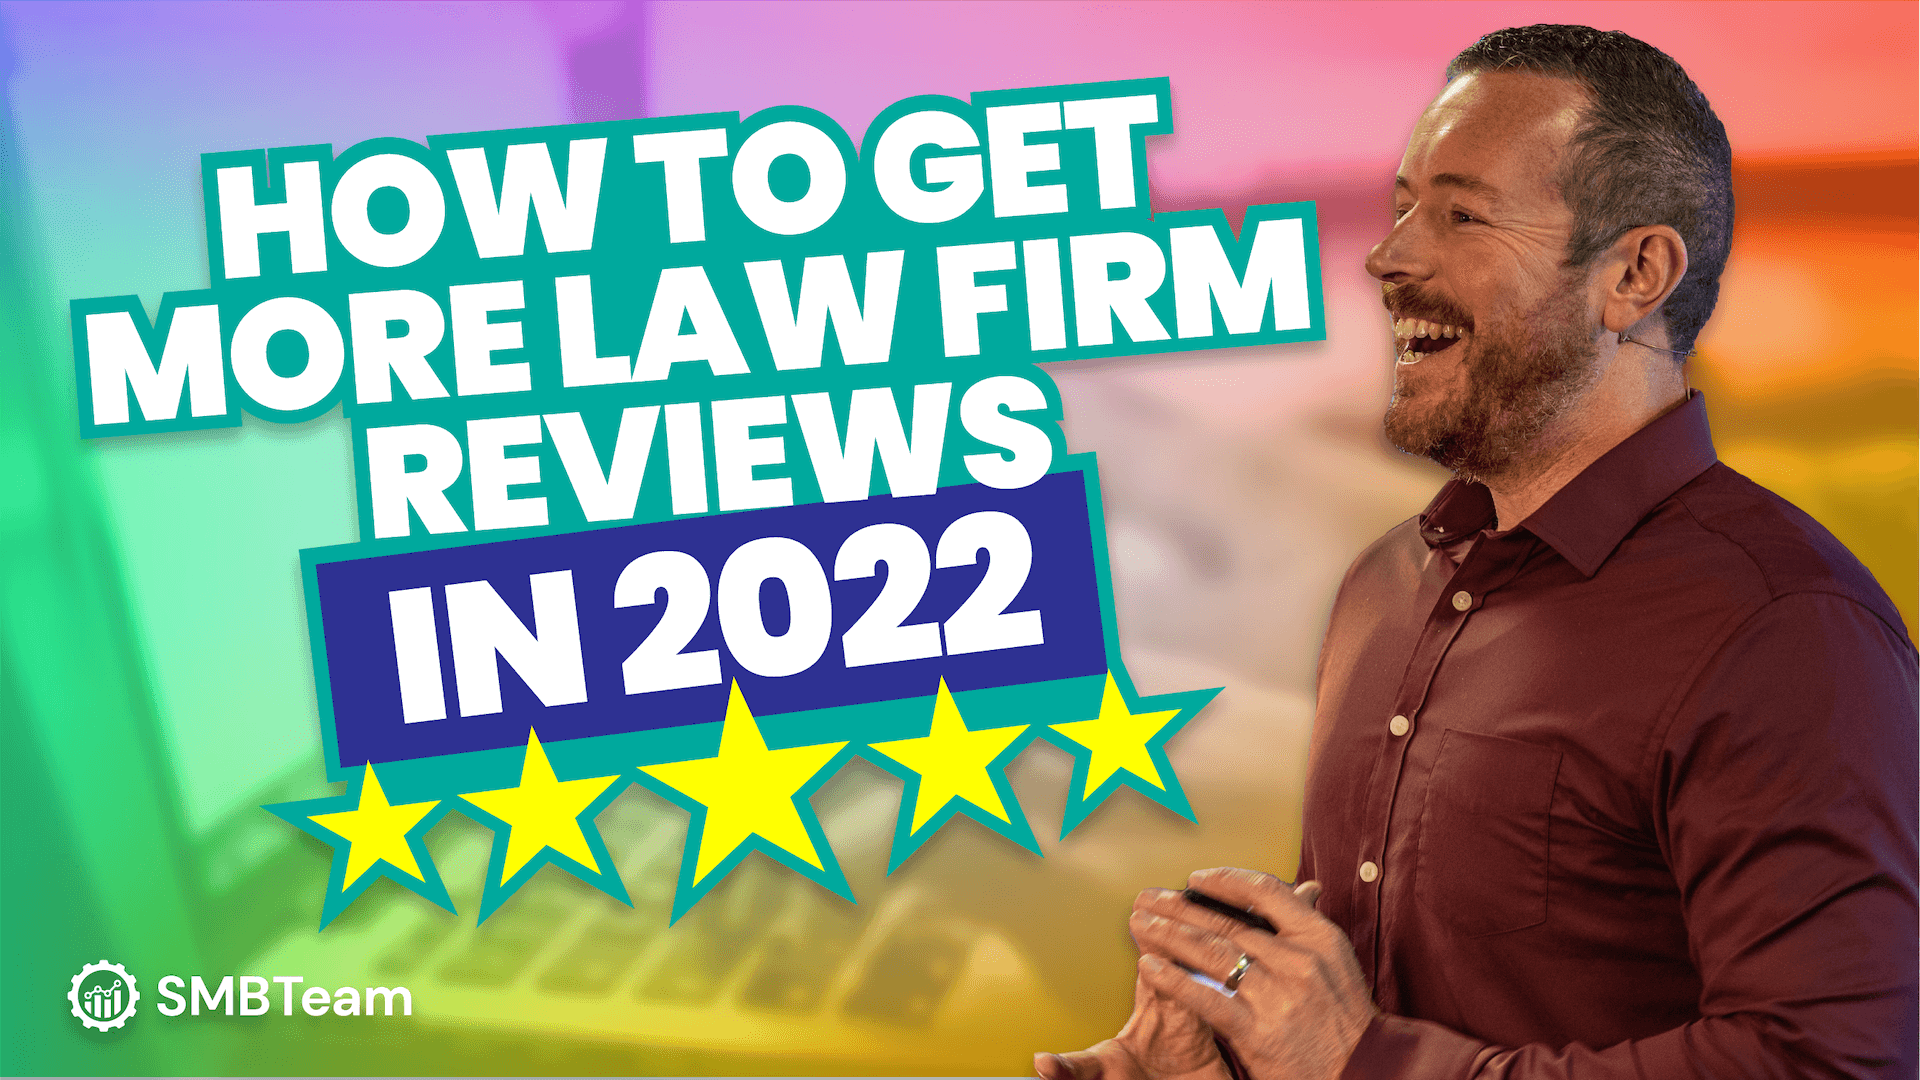 How To Get More Law Firm Reviews in 2022